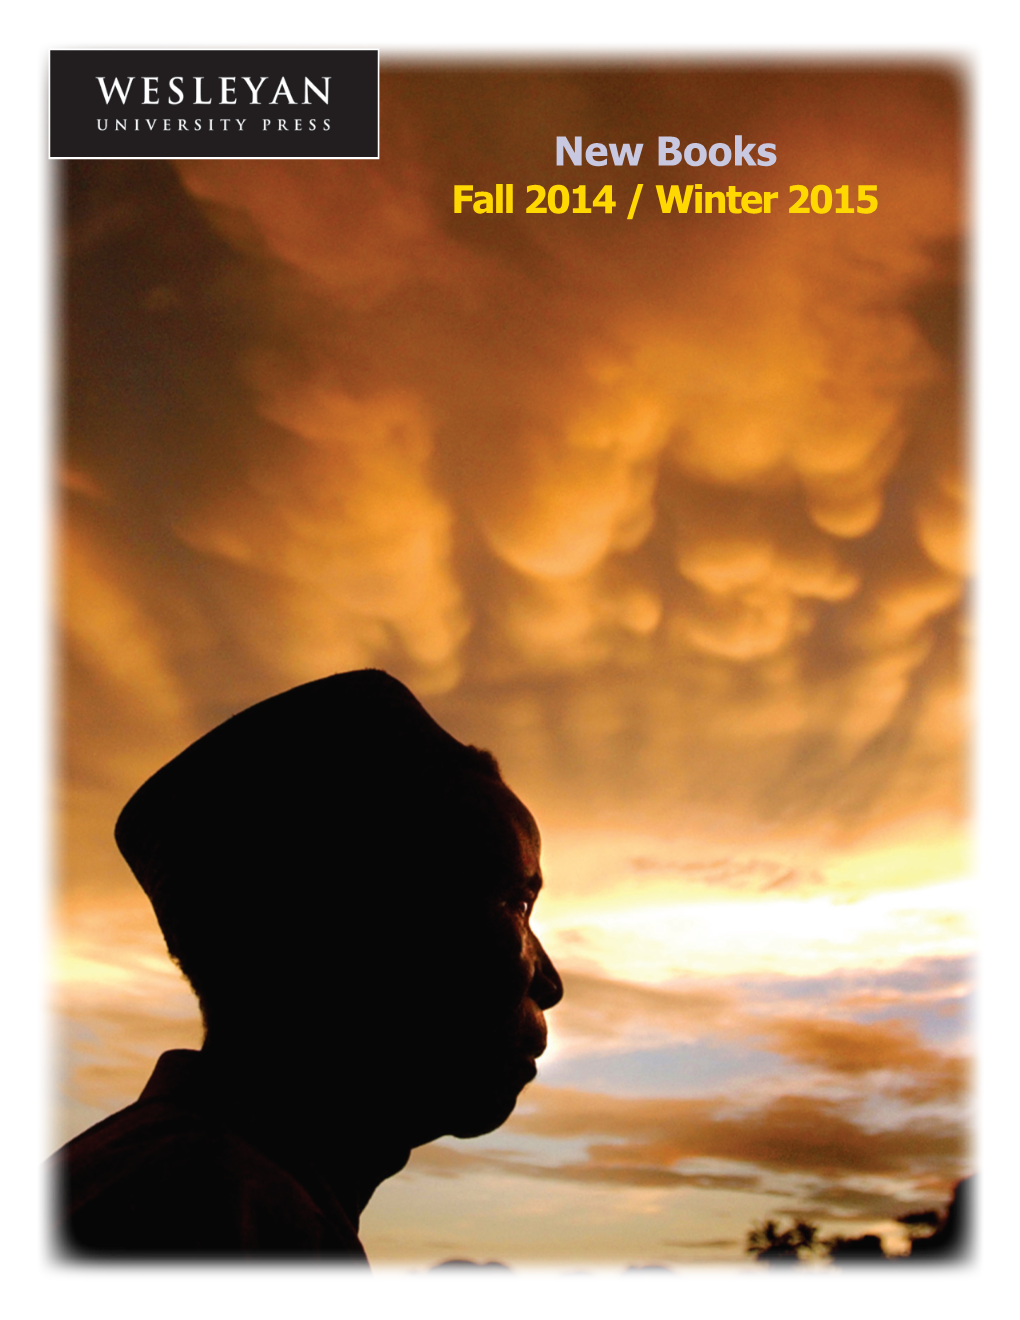 New Books Fall 2014 / Winter 2015 Free Online Reader’S Companions for Selected Titles!